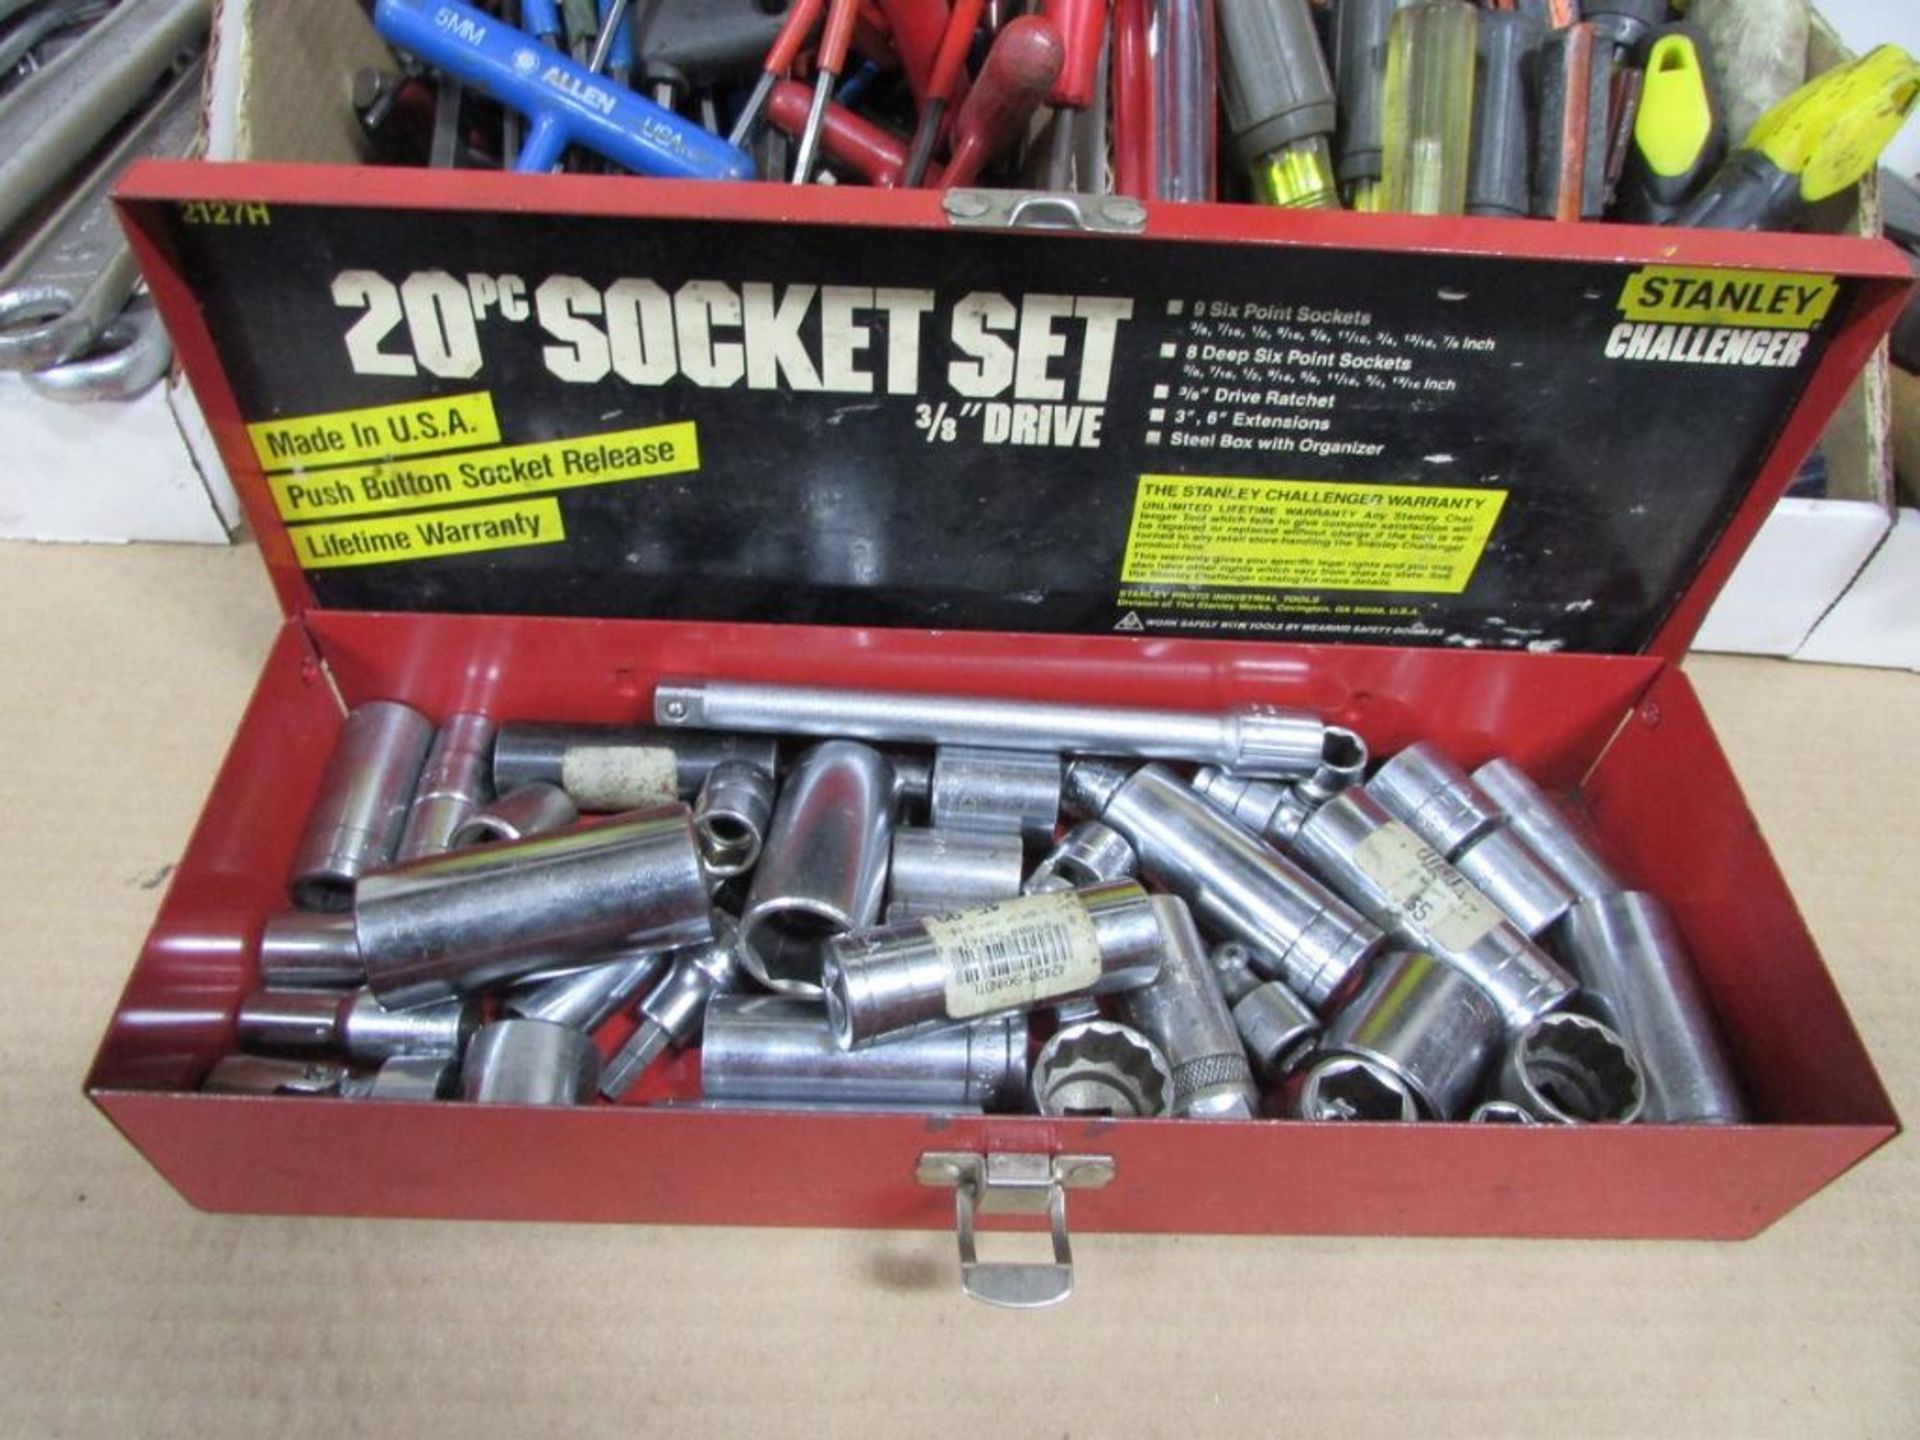 Assorted Hand Tools: Wrenches, Hammers, Files, Drivers, Allen Wrenches, Adjustable Wrenches, Ratchet - Image 4 of 4